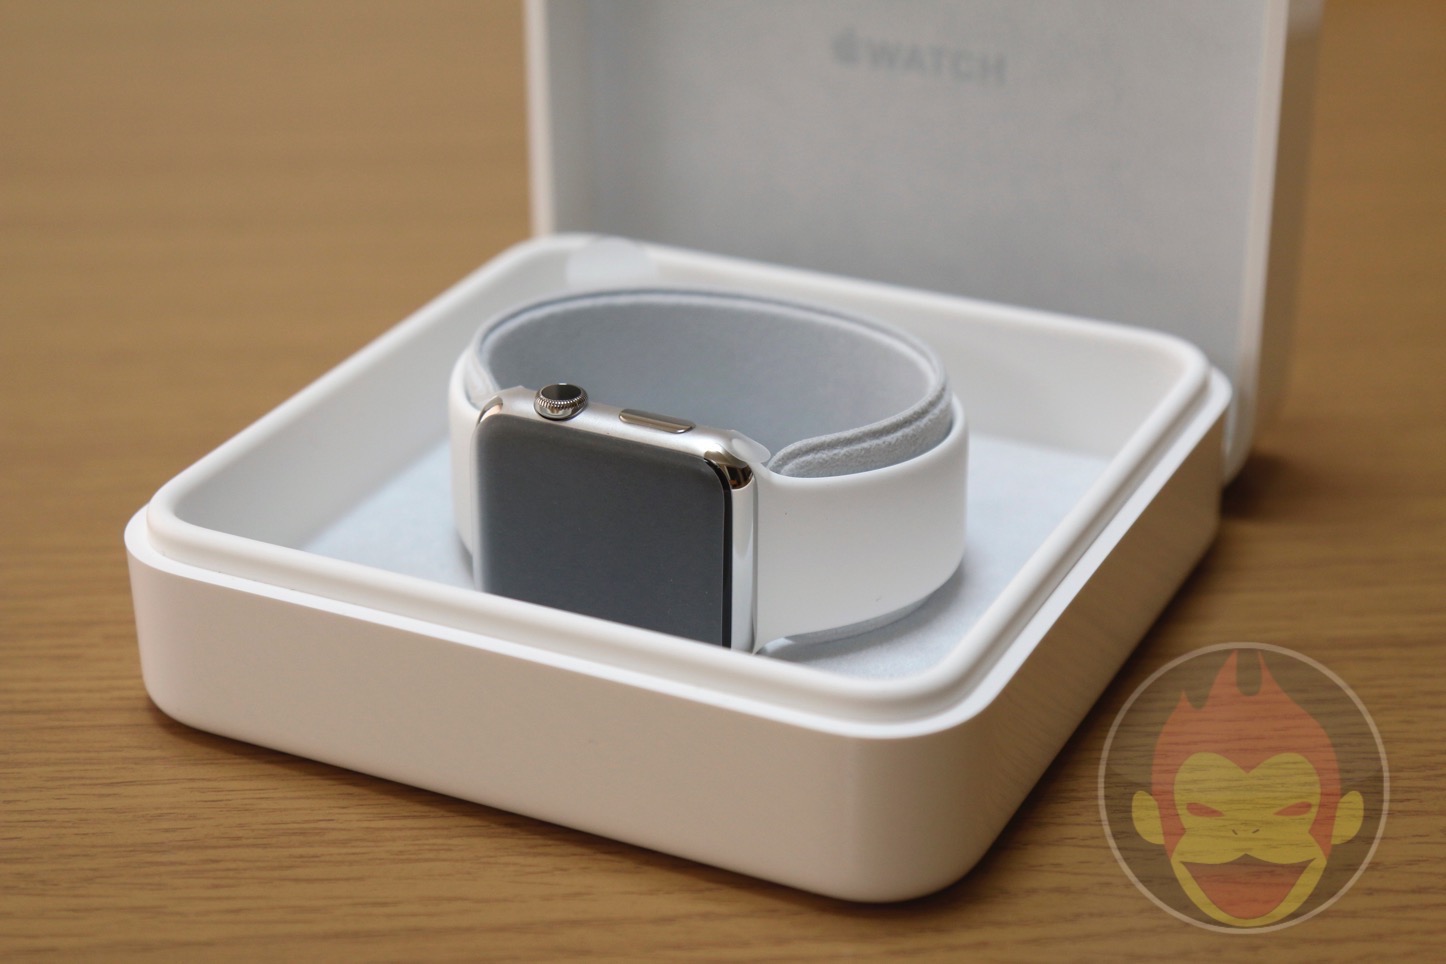 Apple-Watch-Stainless-Steel-White-Band-42mm-016.jpg